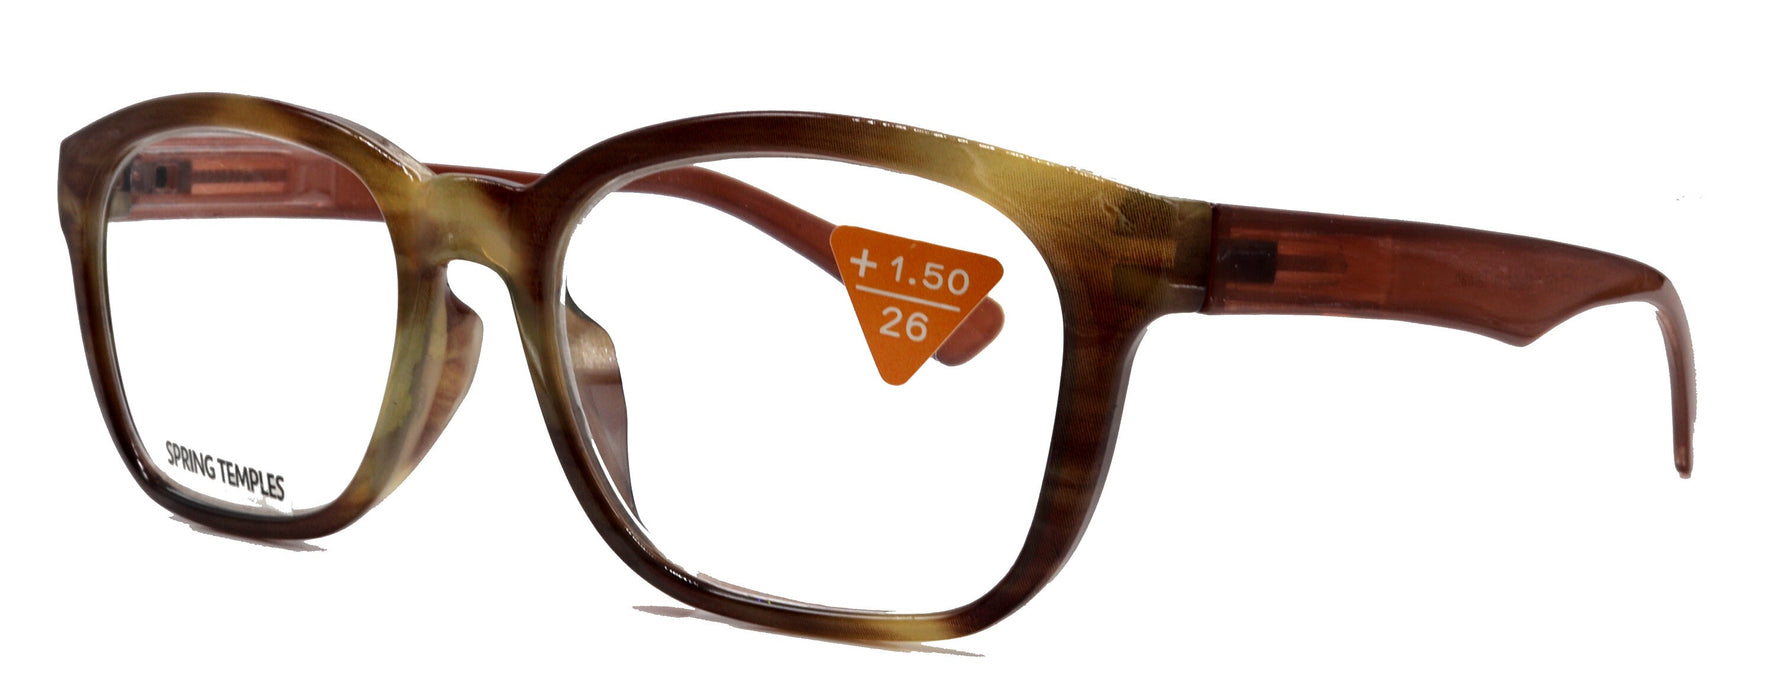 Coral, (Premium) Reading Glasses, High End Readers +1.25 to +3. Magnifying Glasses (Brown) Rectangular style. Optical Frame. NY Fifth Avenue